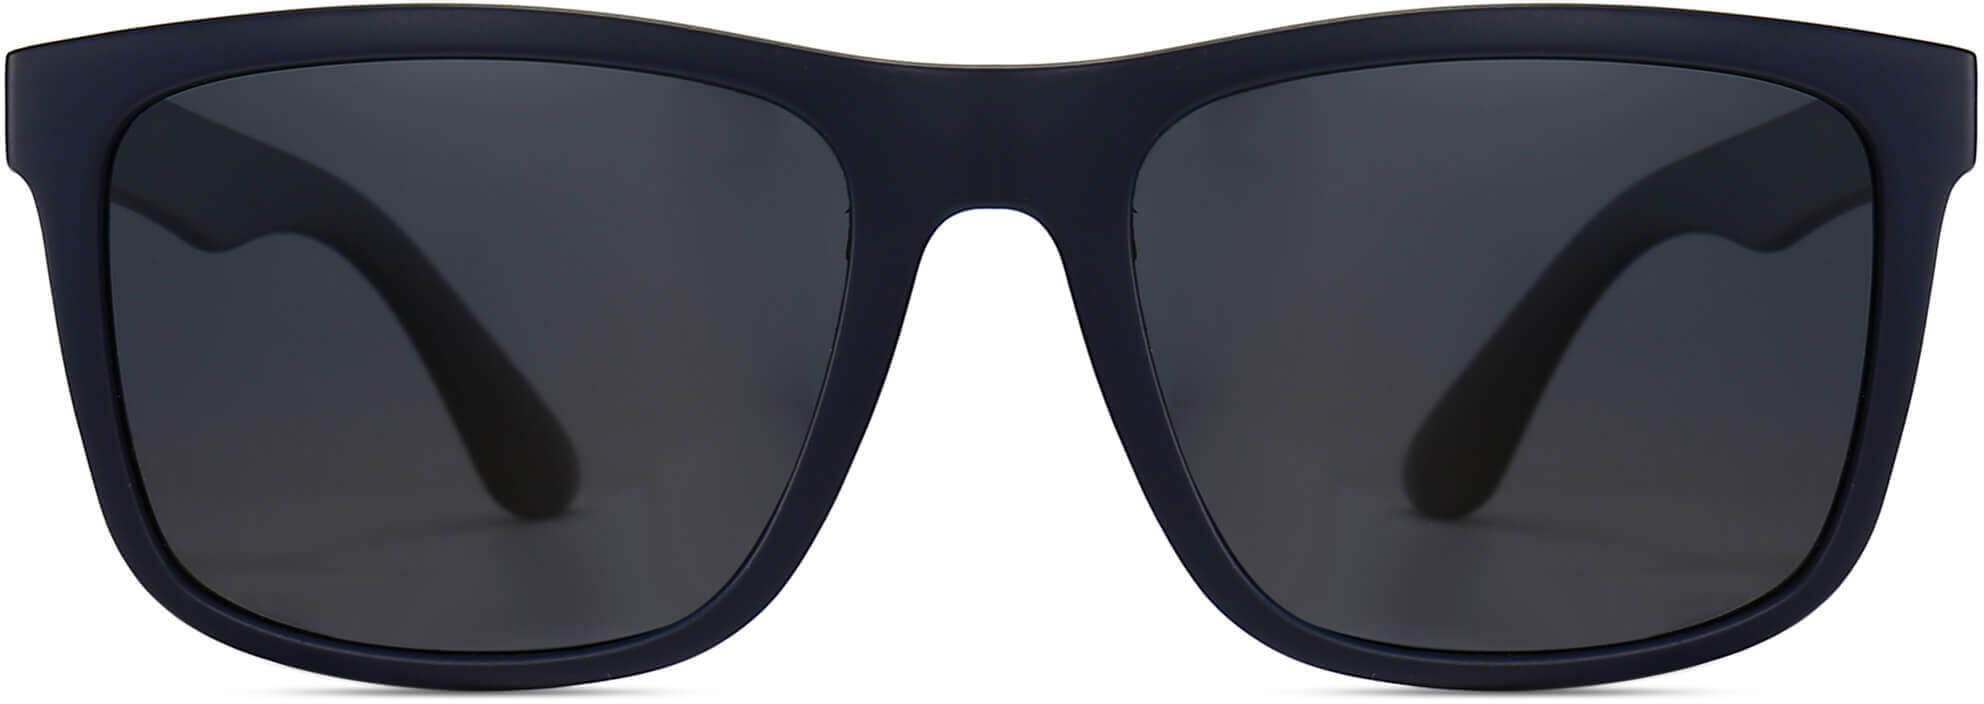 Zion Blue Plastic Sunglasses from ANRRI, front view